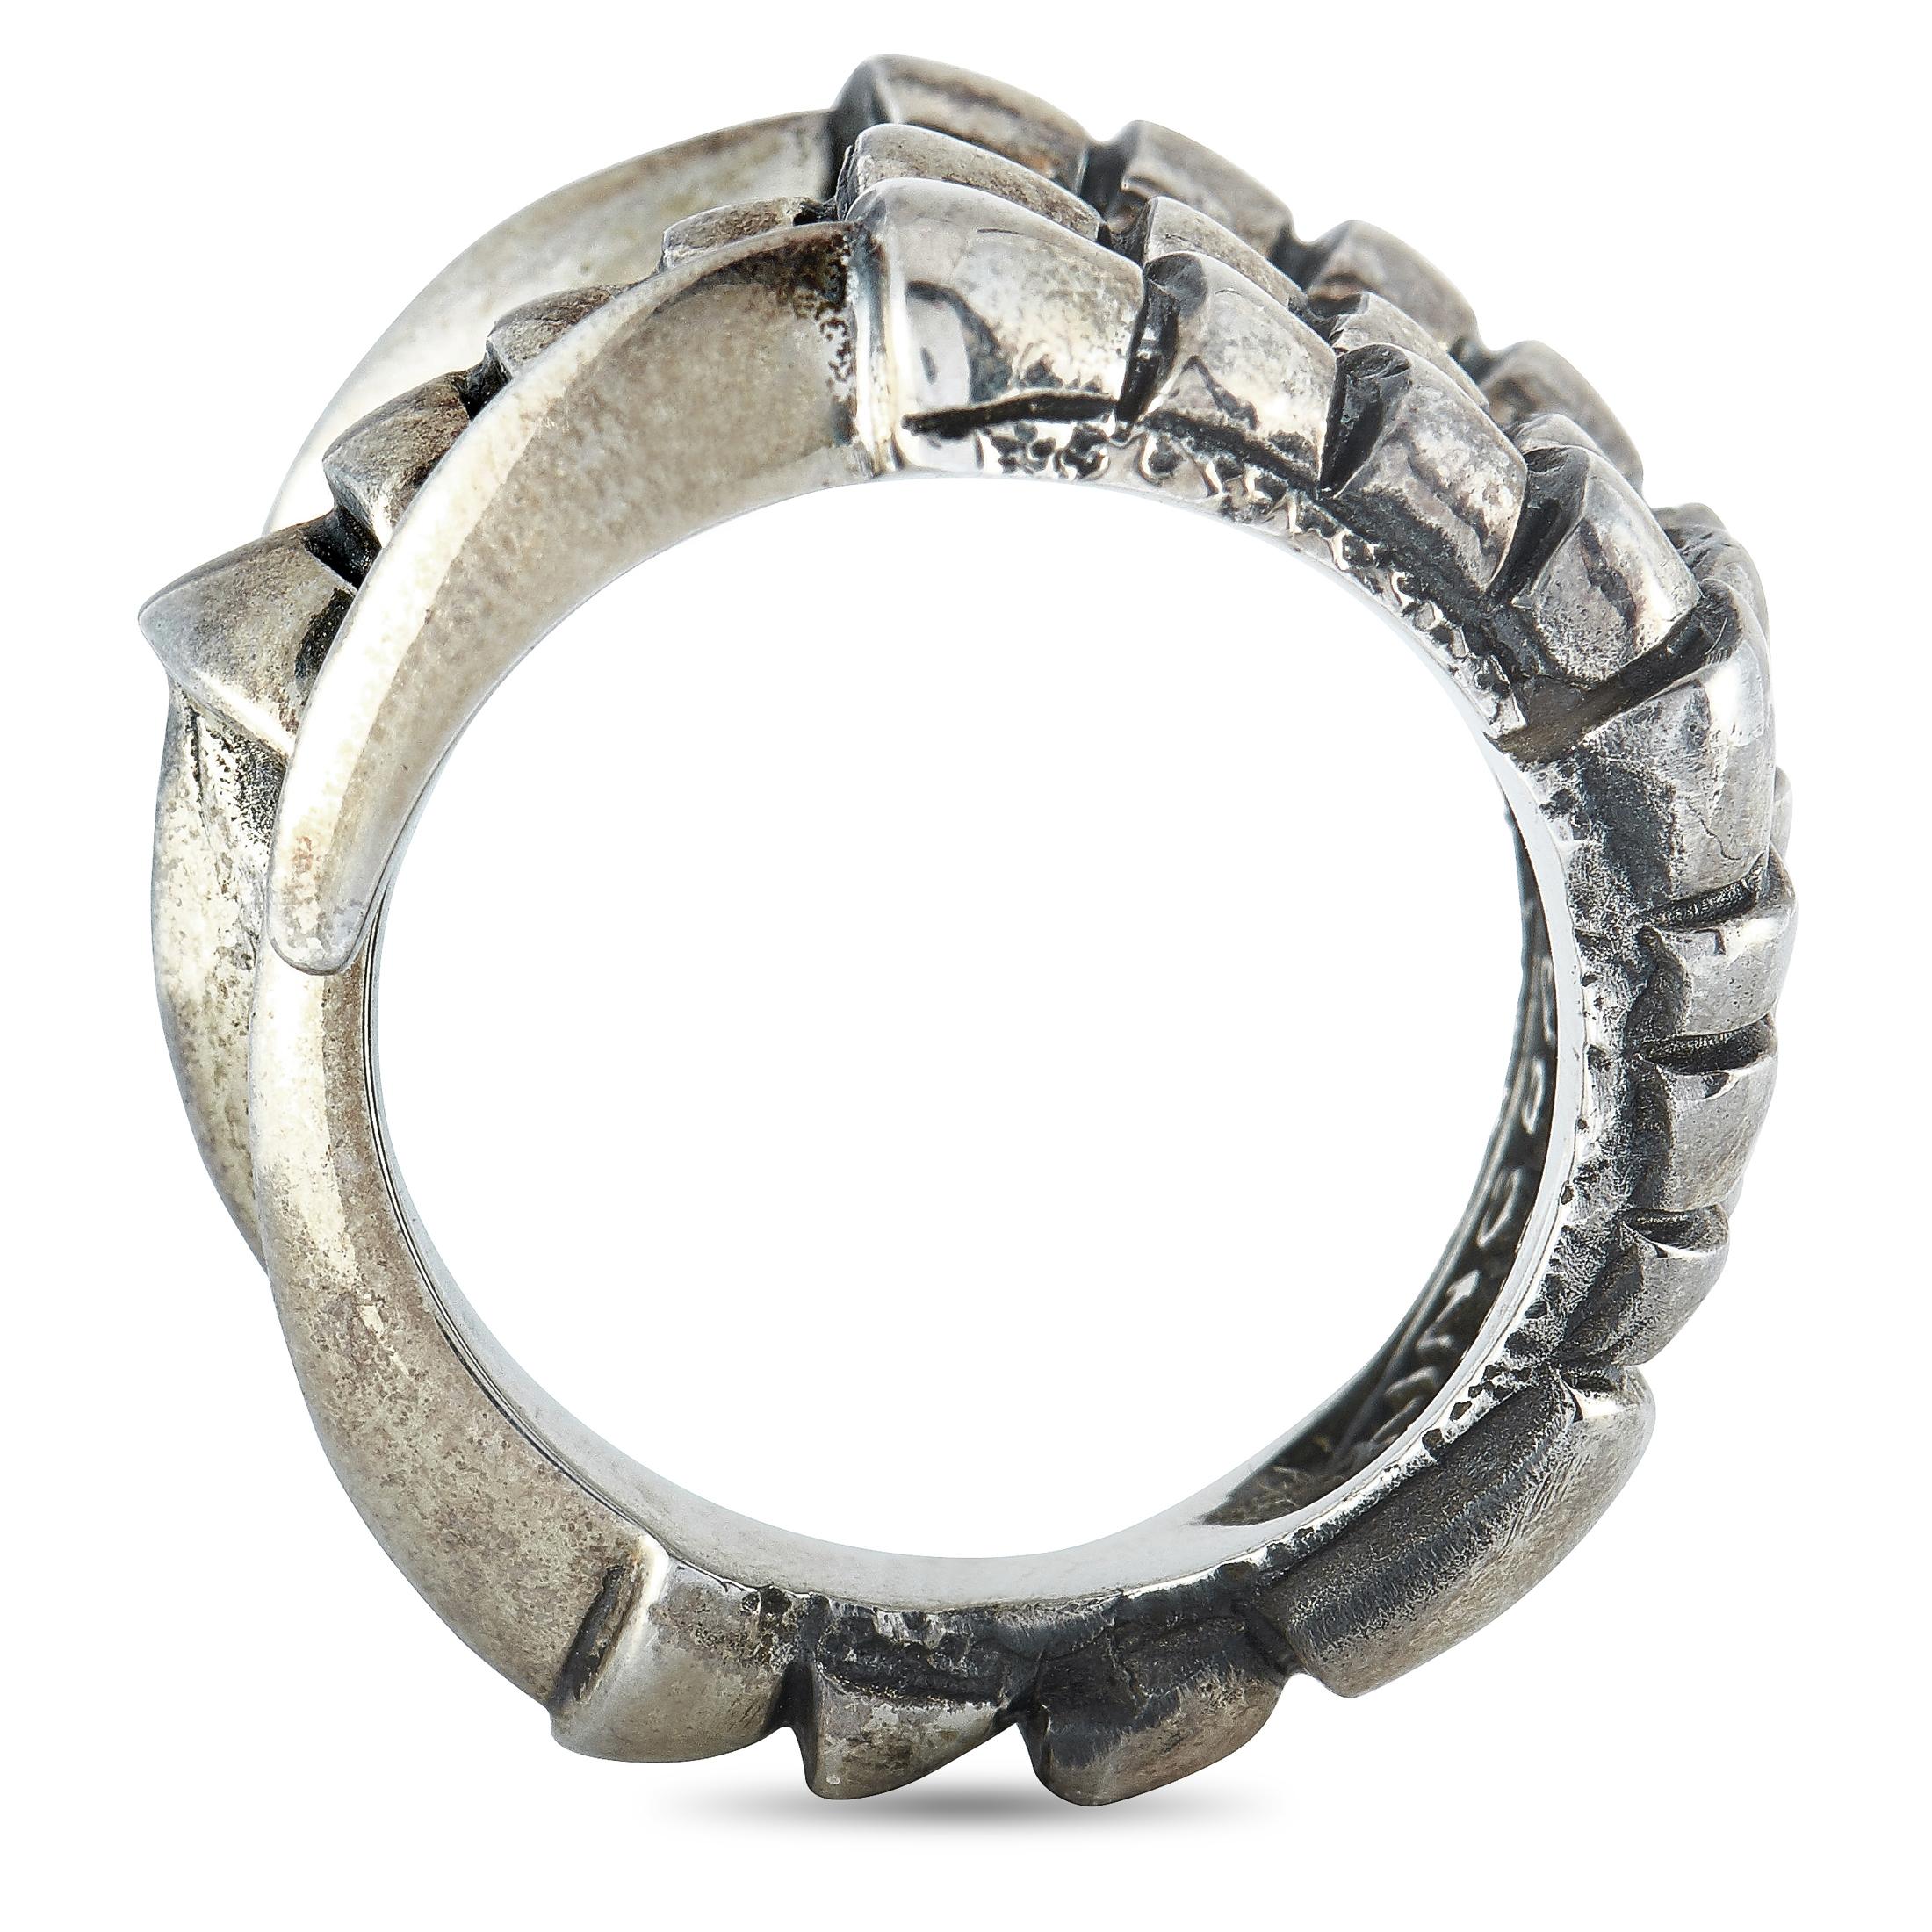 This King Baby ring is crafted from sterling silver and weighs 25.9 grams. The ring boasts band thickness of 6 mm and top height of 4 mm, while top dimensions measure 25 by 25 mm.

Offered in brand new condition, this jewelry piece includes the